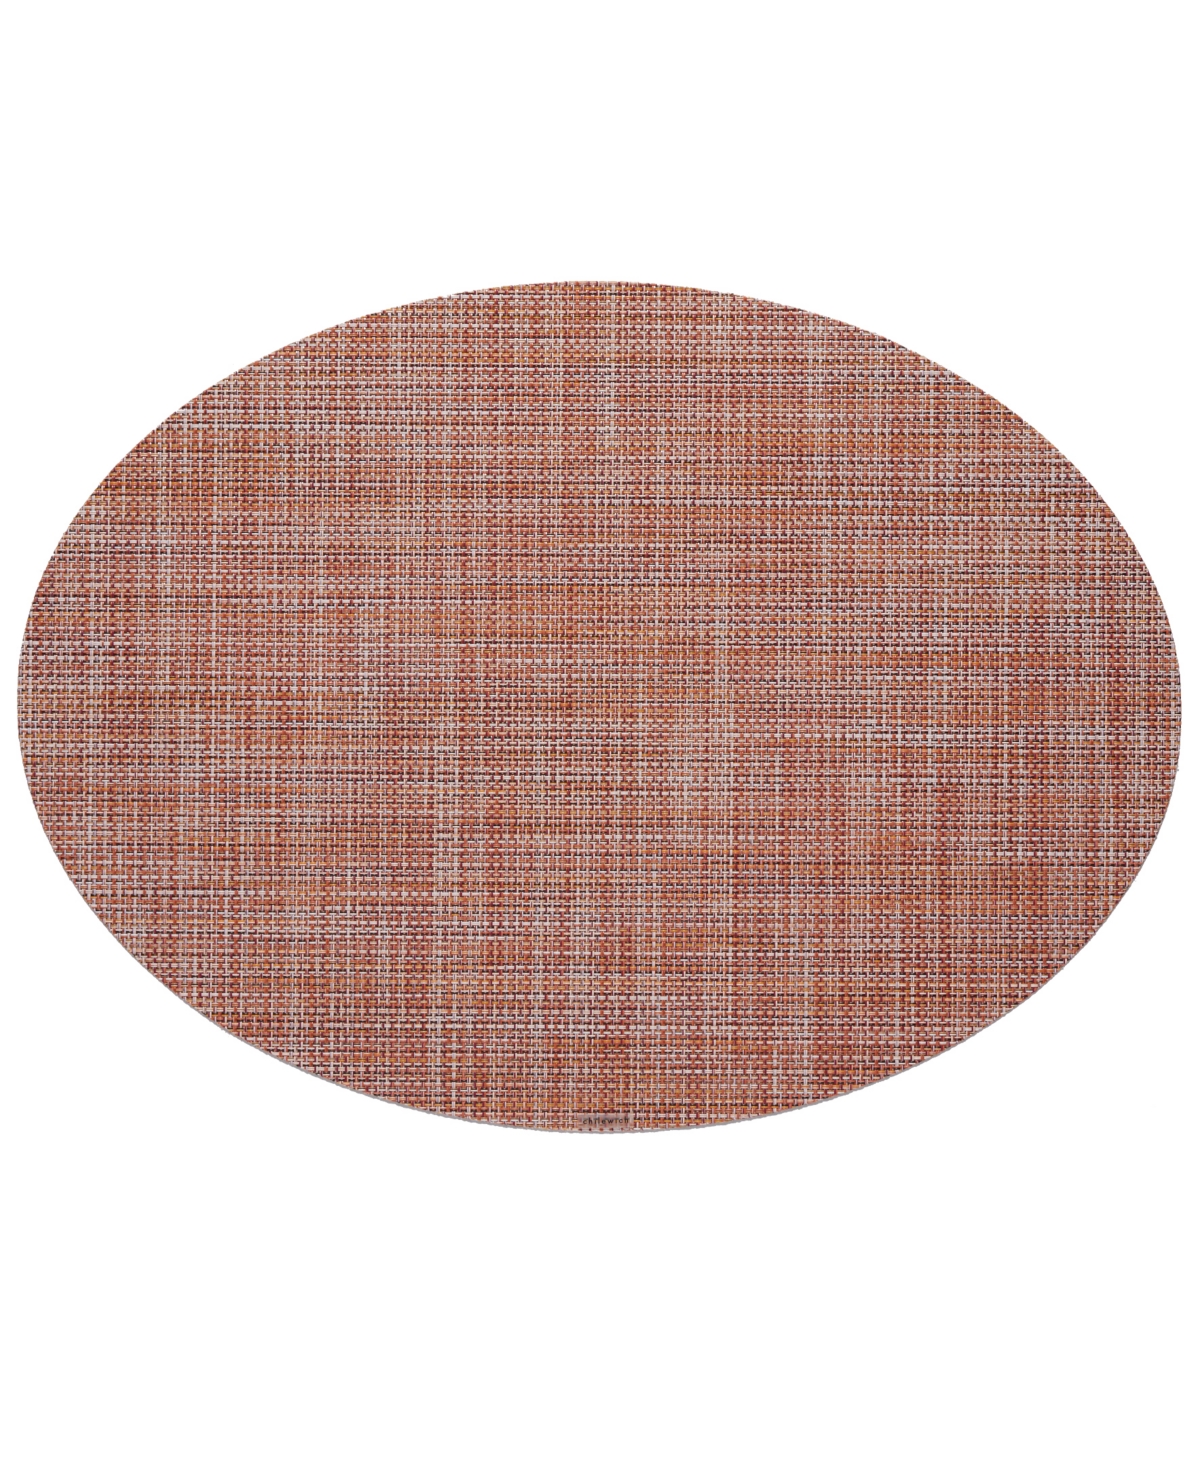 Chilewich Mini Basketweave Oval Placemat In Cinnamon